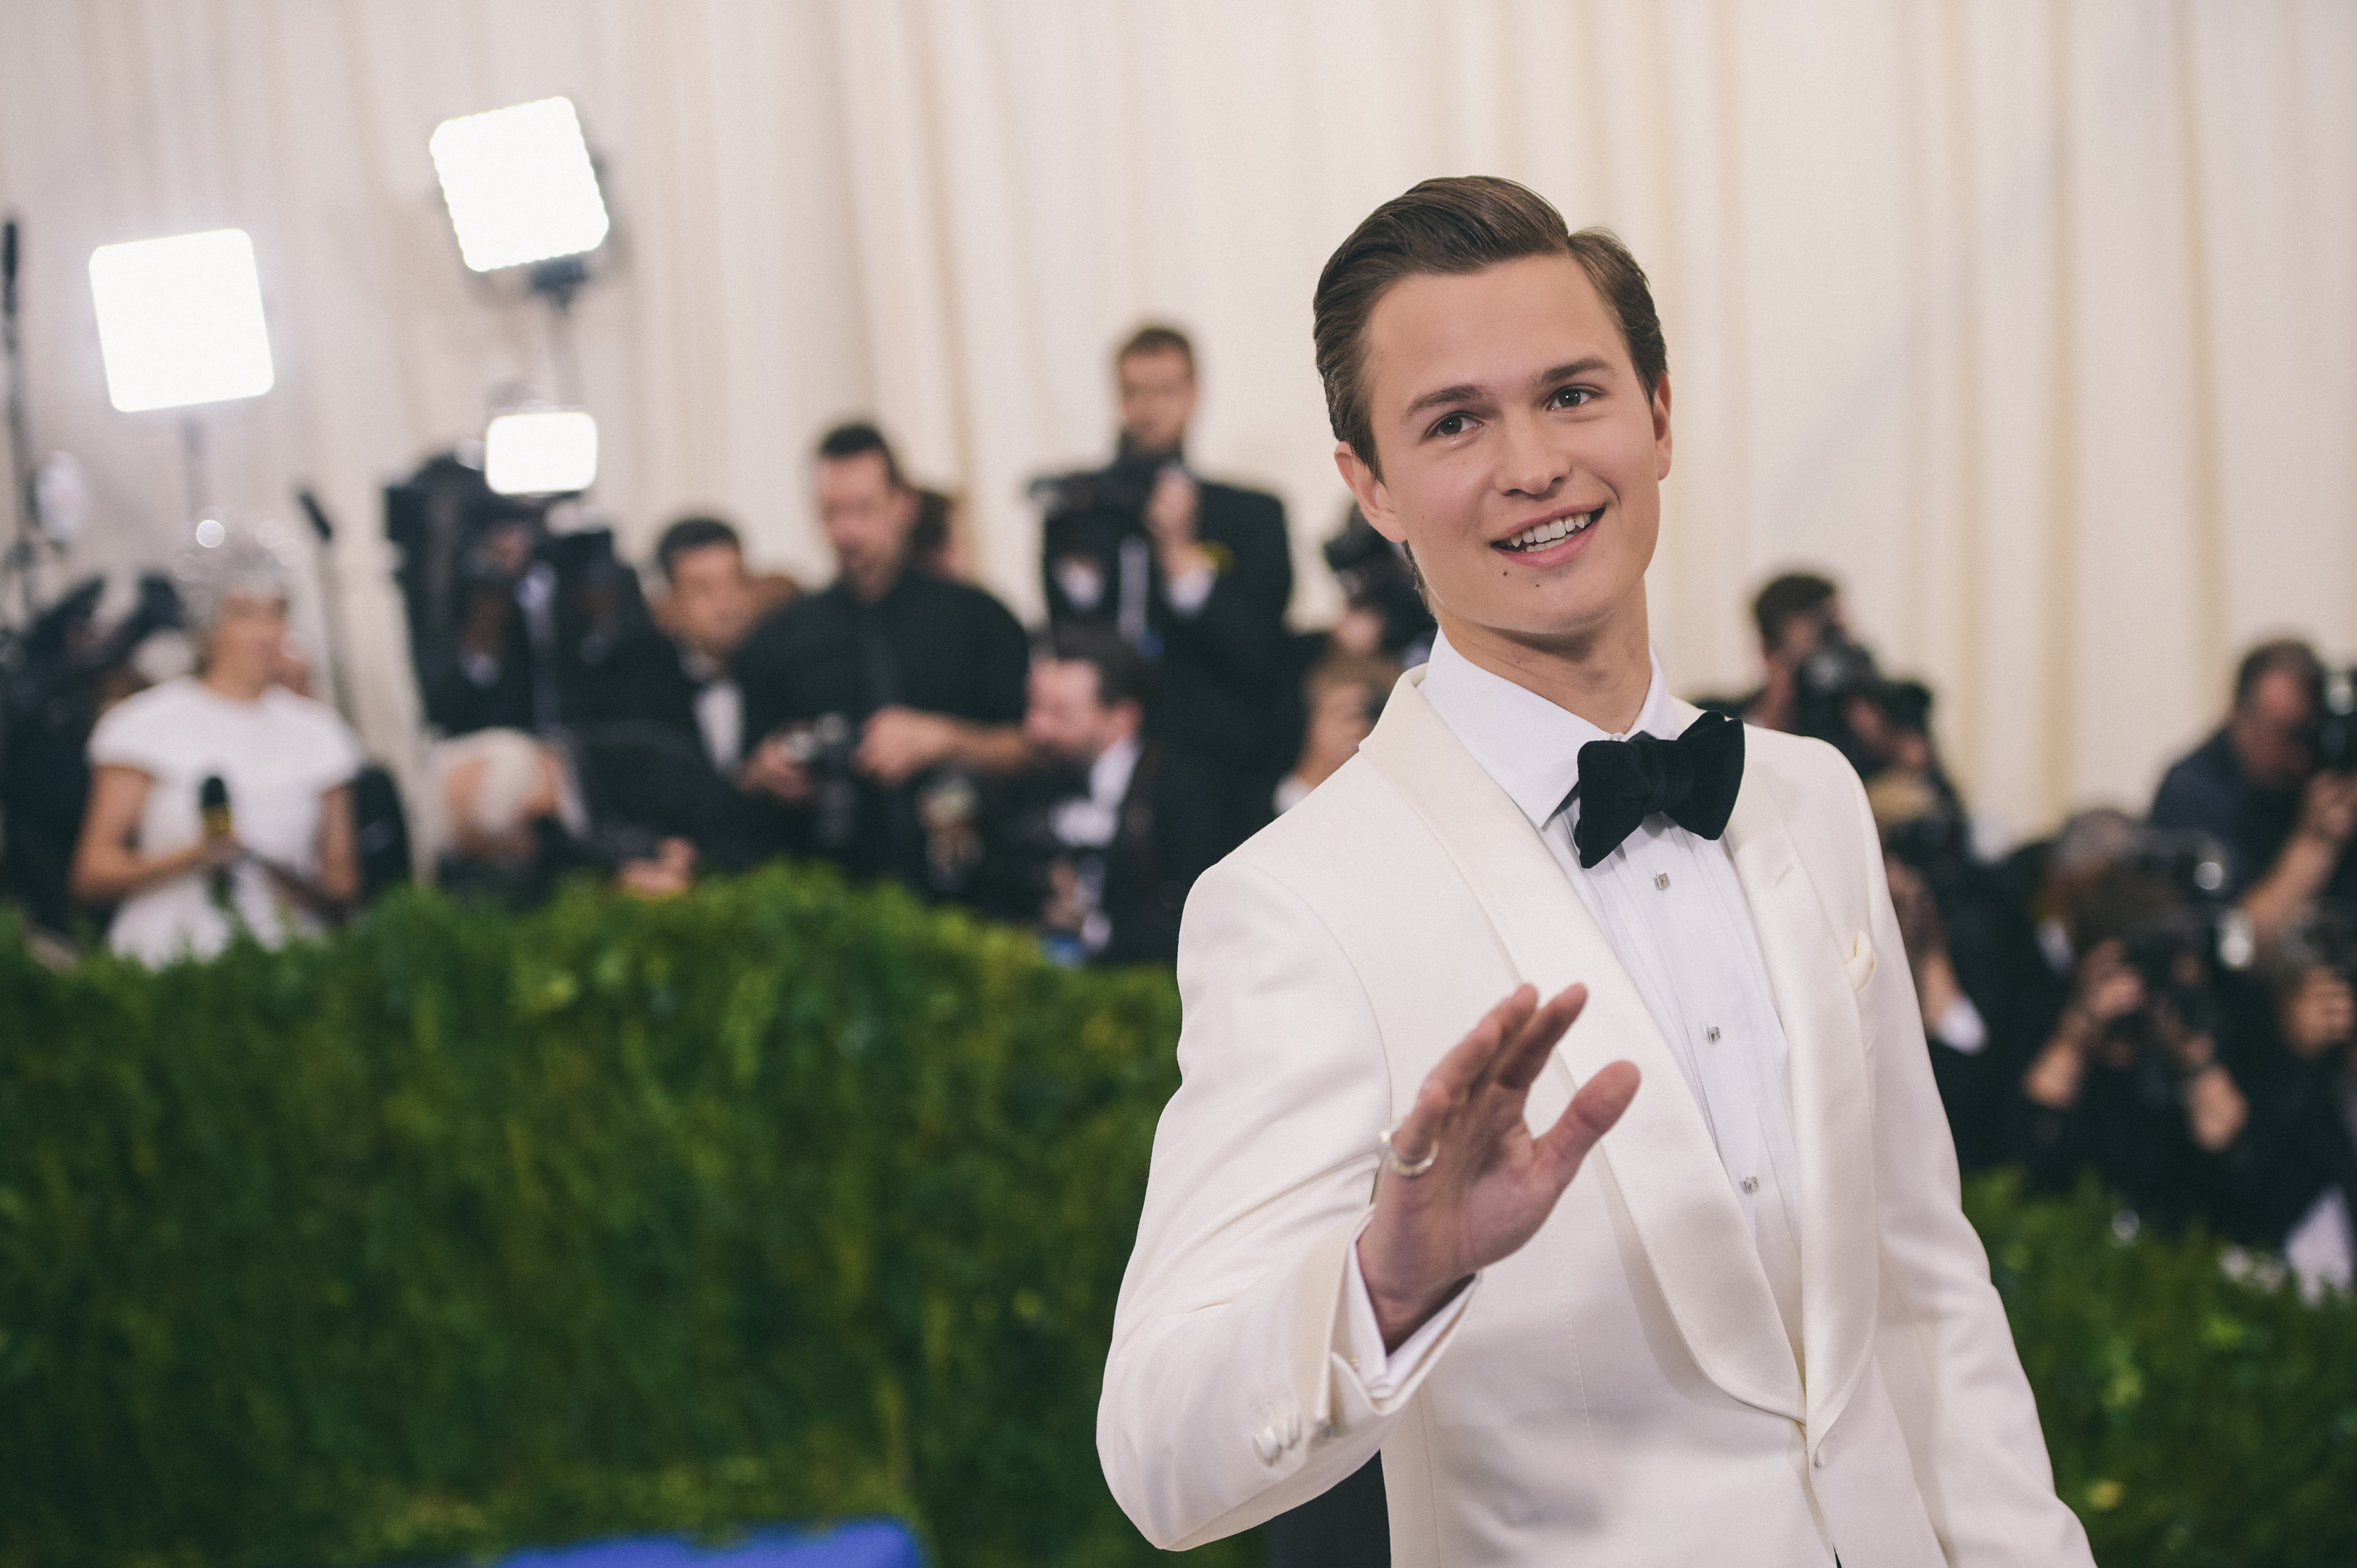 Ansel Elgort attends the Costume Institute Gala at Metropolitan Museum of Art on May 1, 2017 in New York City.